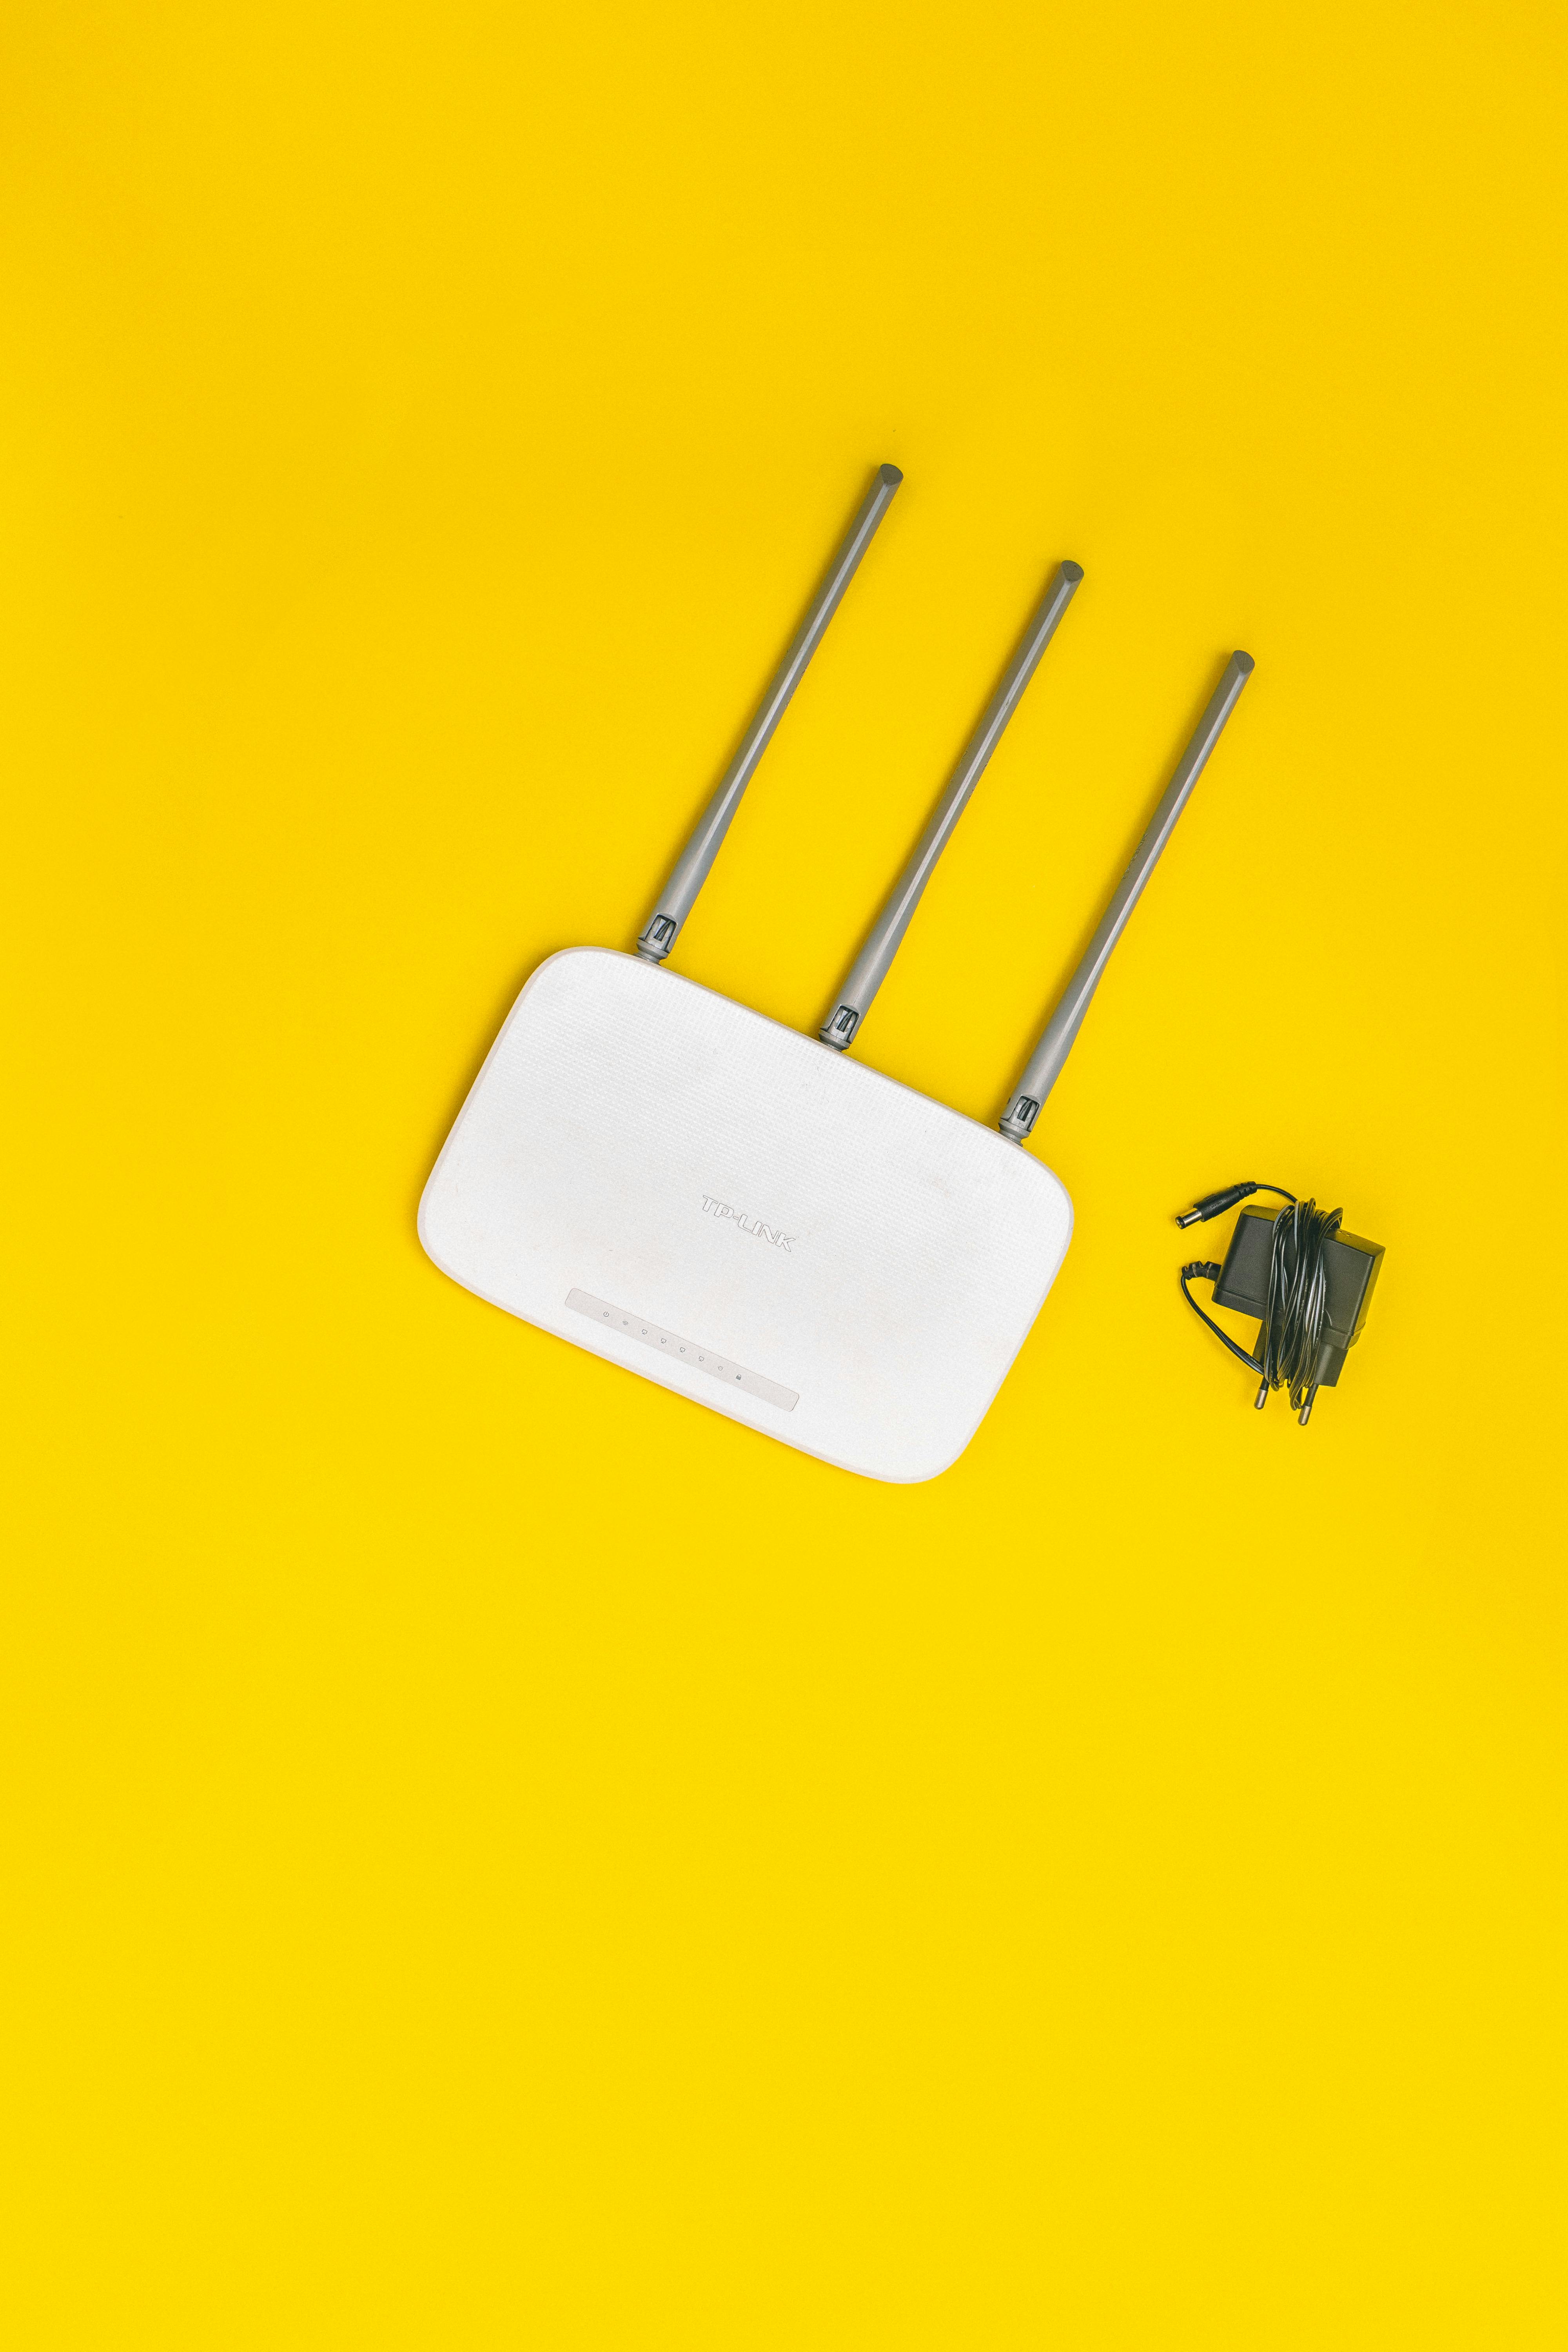 A wifi router on a yellow background | Source: Pexels